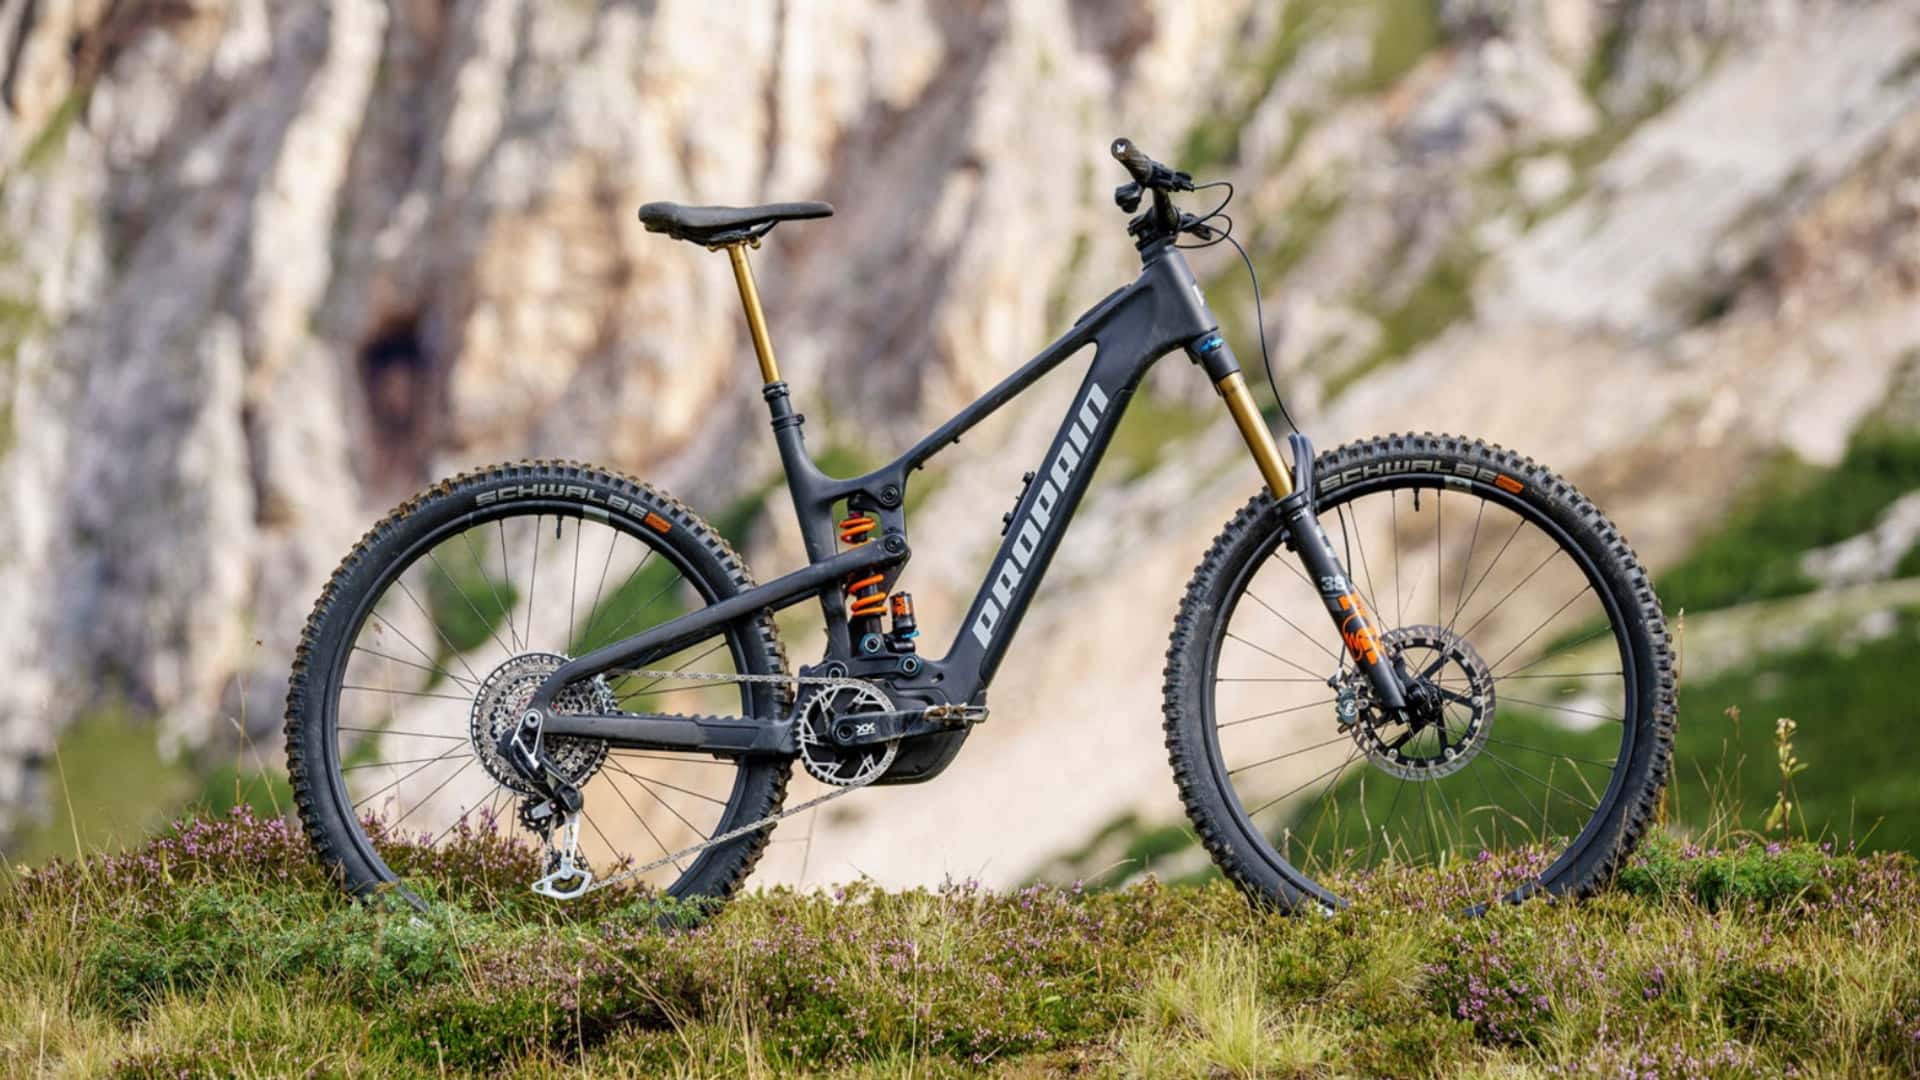 propain ekano 2 cf packs a punch with carbon frame, sram eagle powertrain